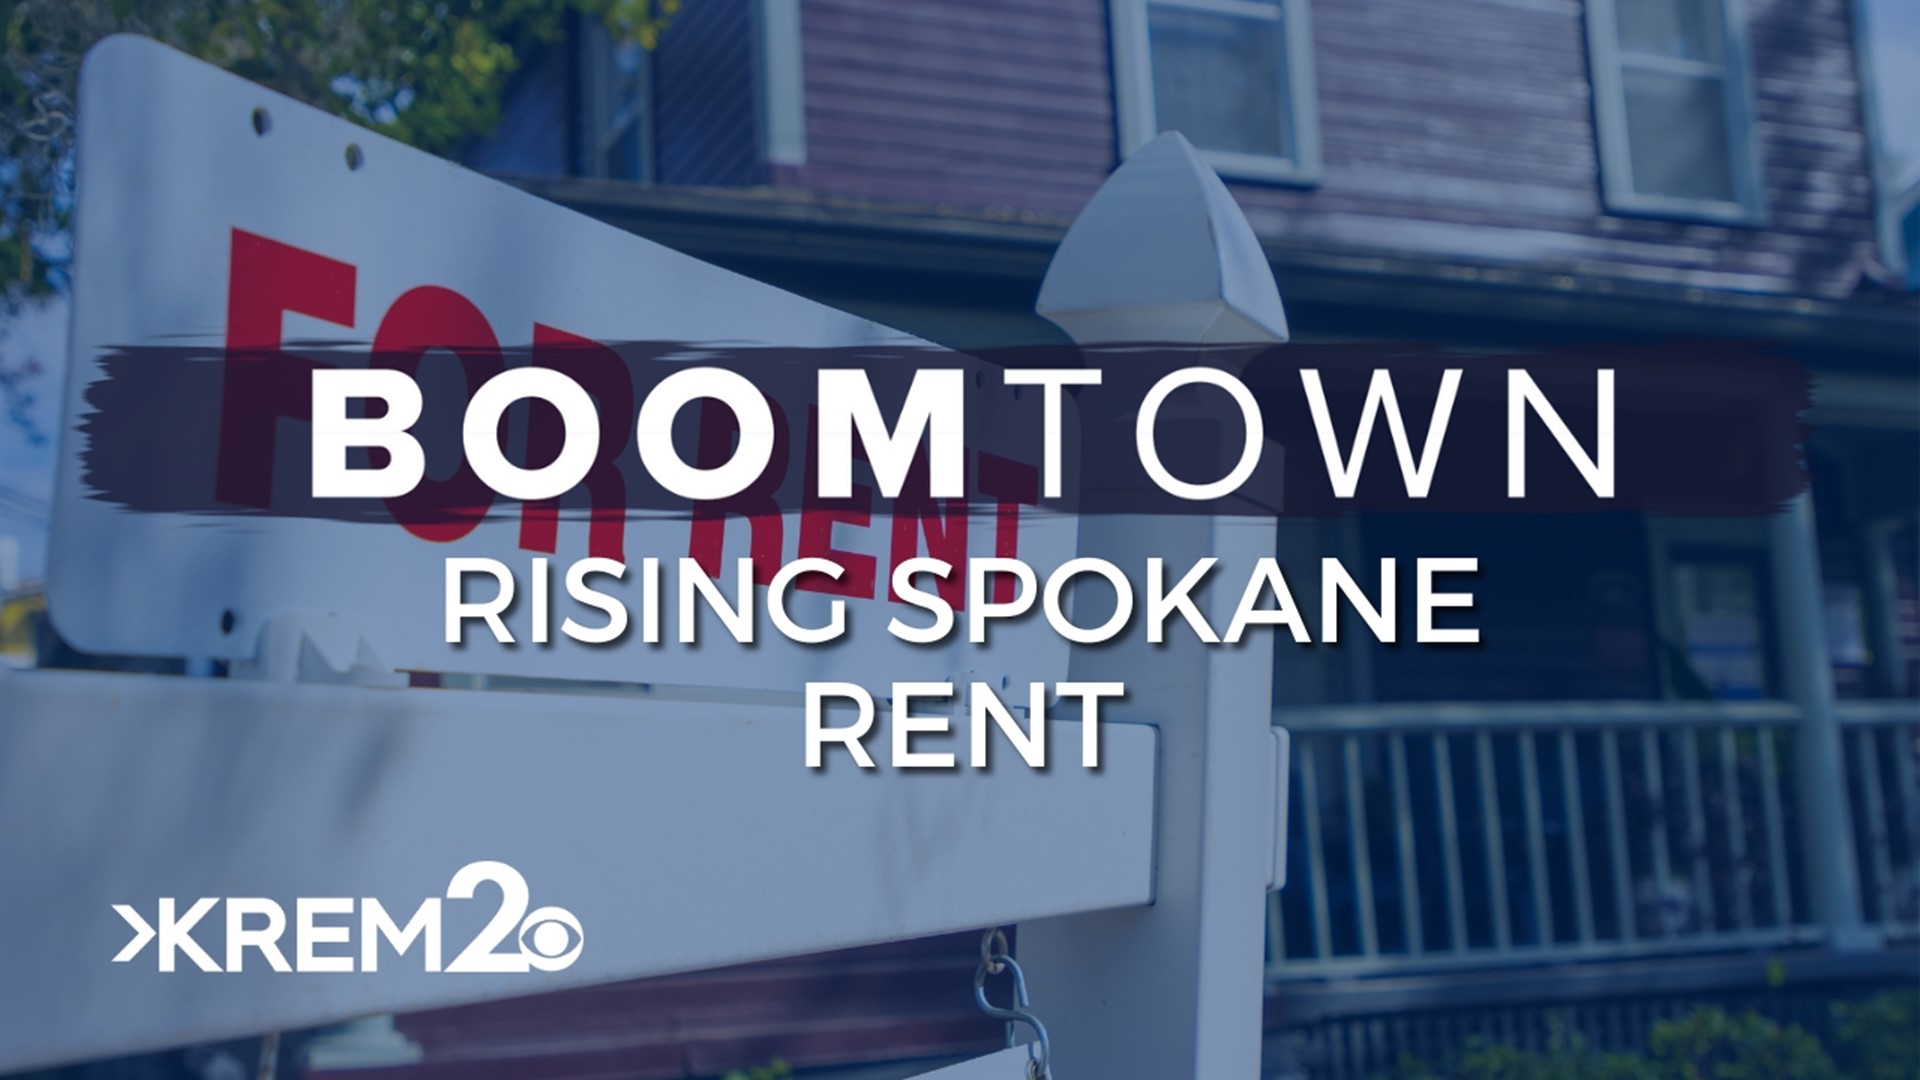 As prices go up in the Spokane area, residents and city leaders are demanding more affordable housing options.